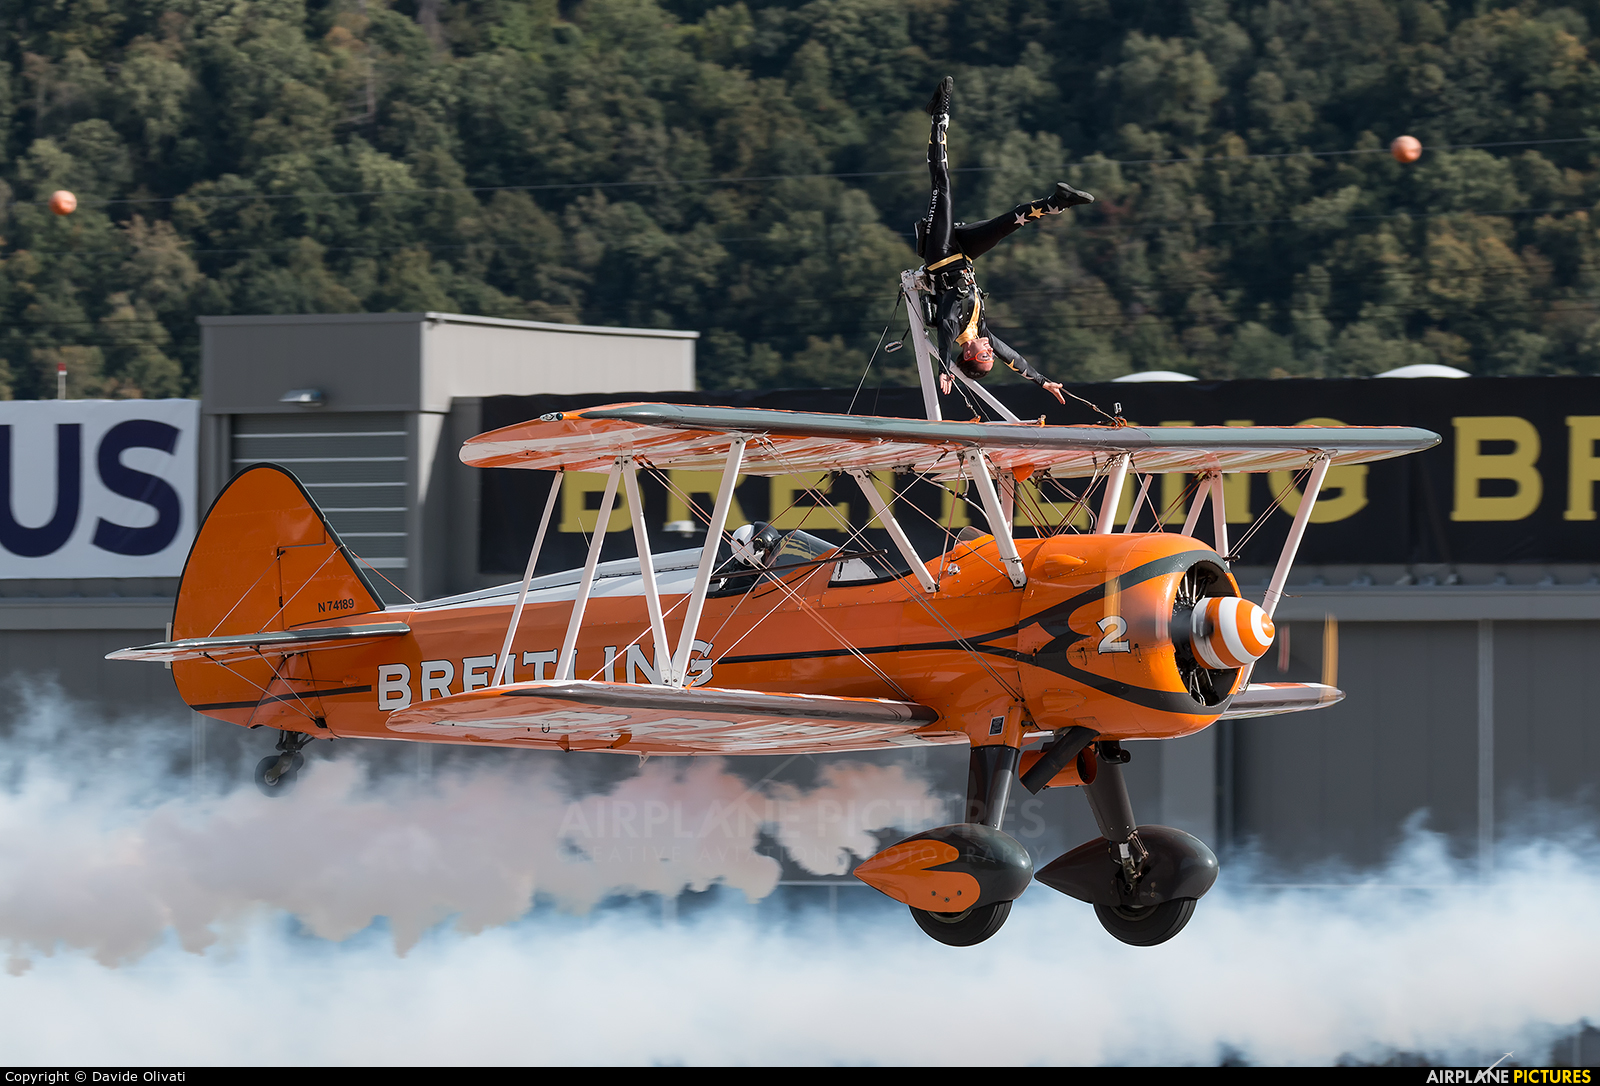 Breitling Wingwalkers N74189 aircraft at Sion